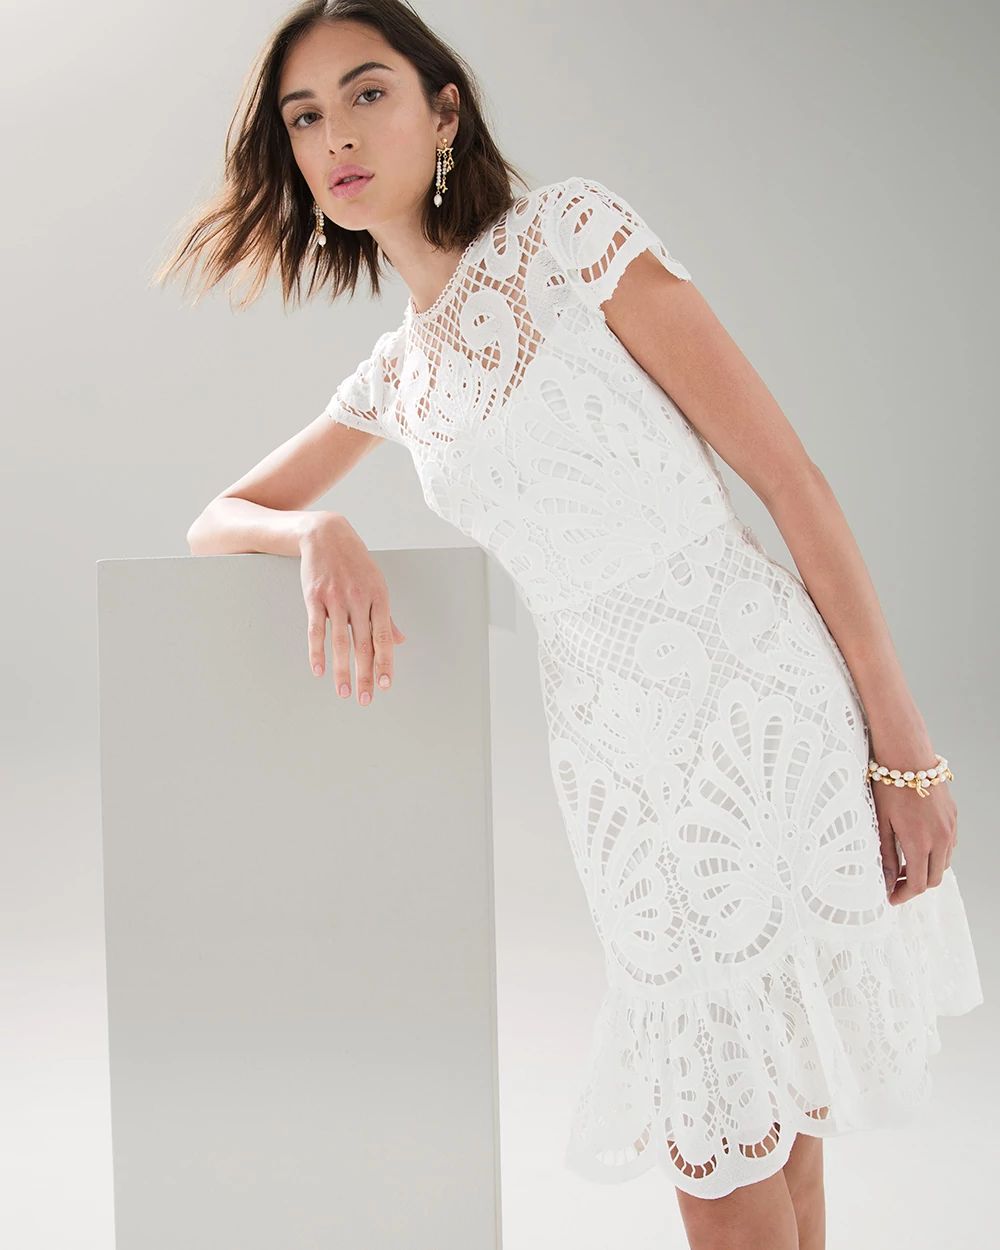 White Cap Sleeve Lace Dress click to view larger image.